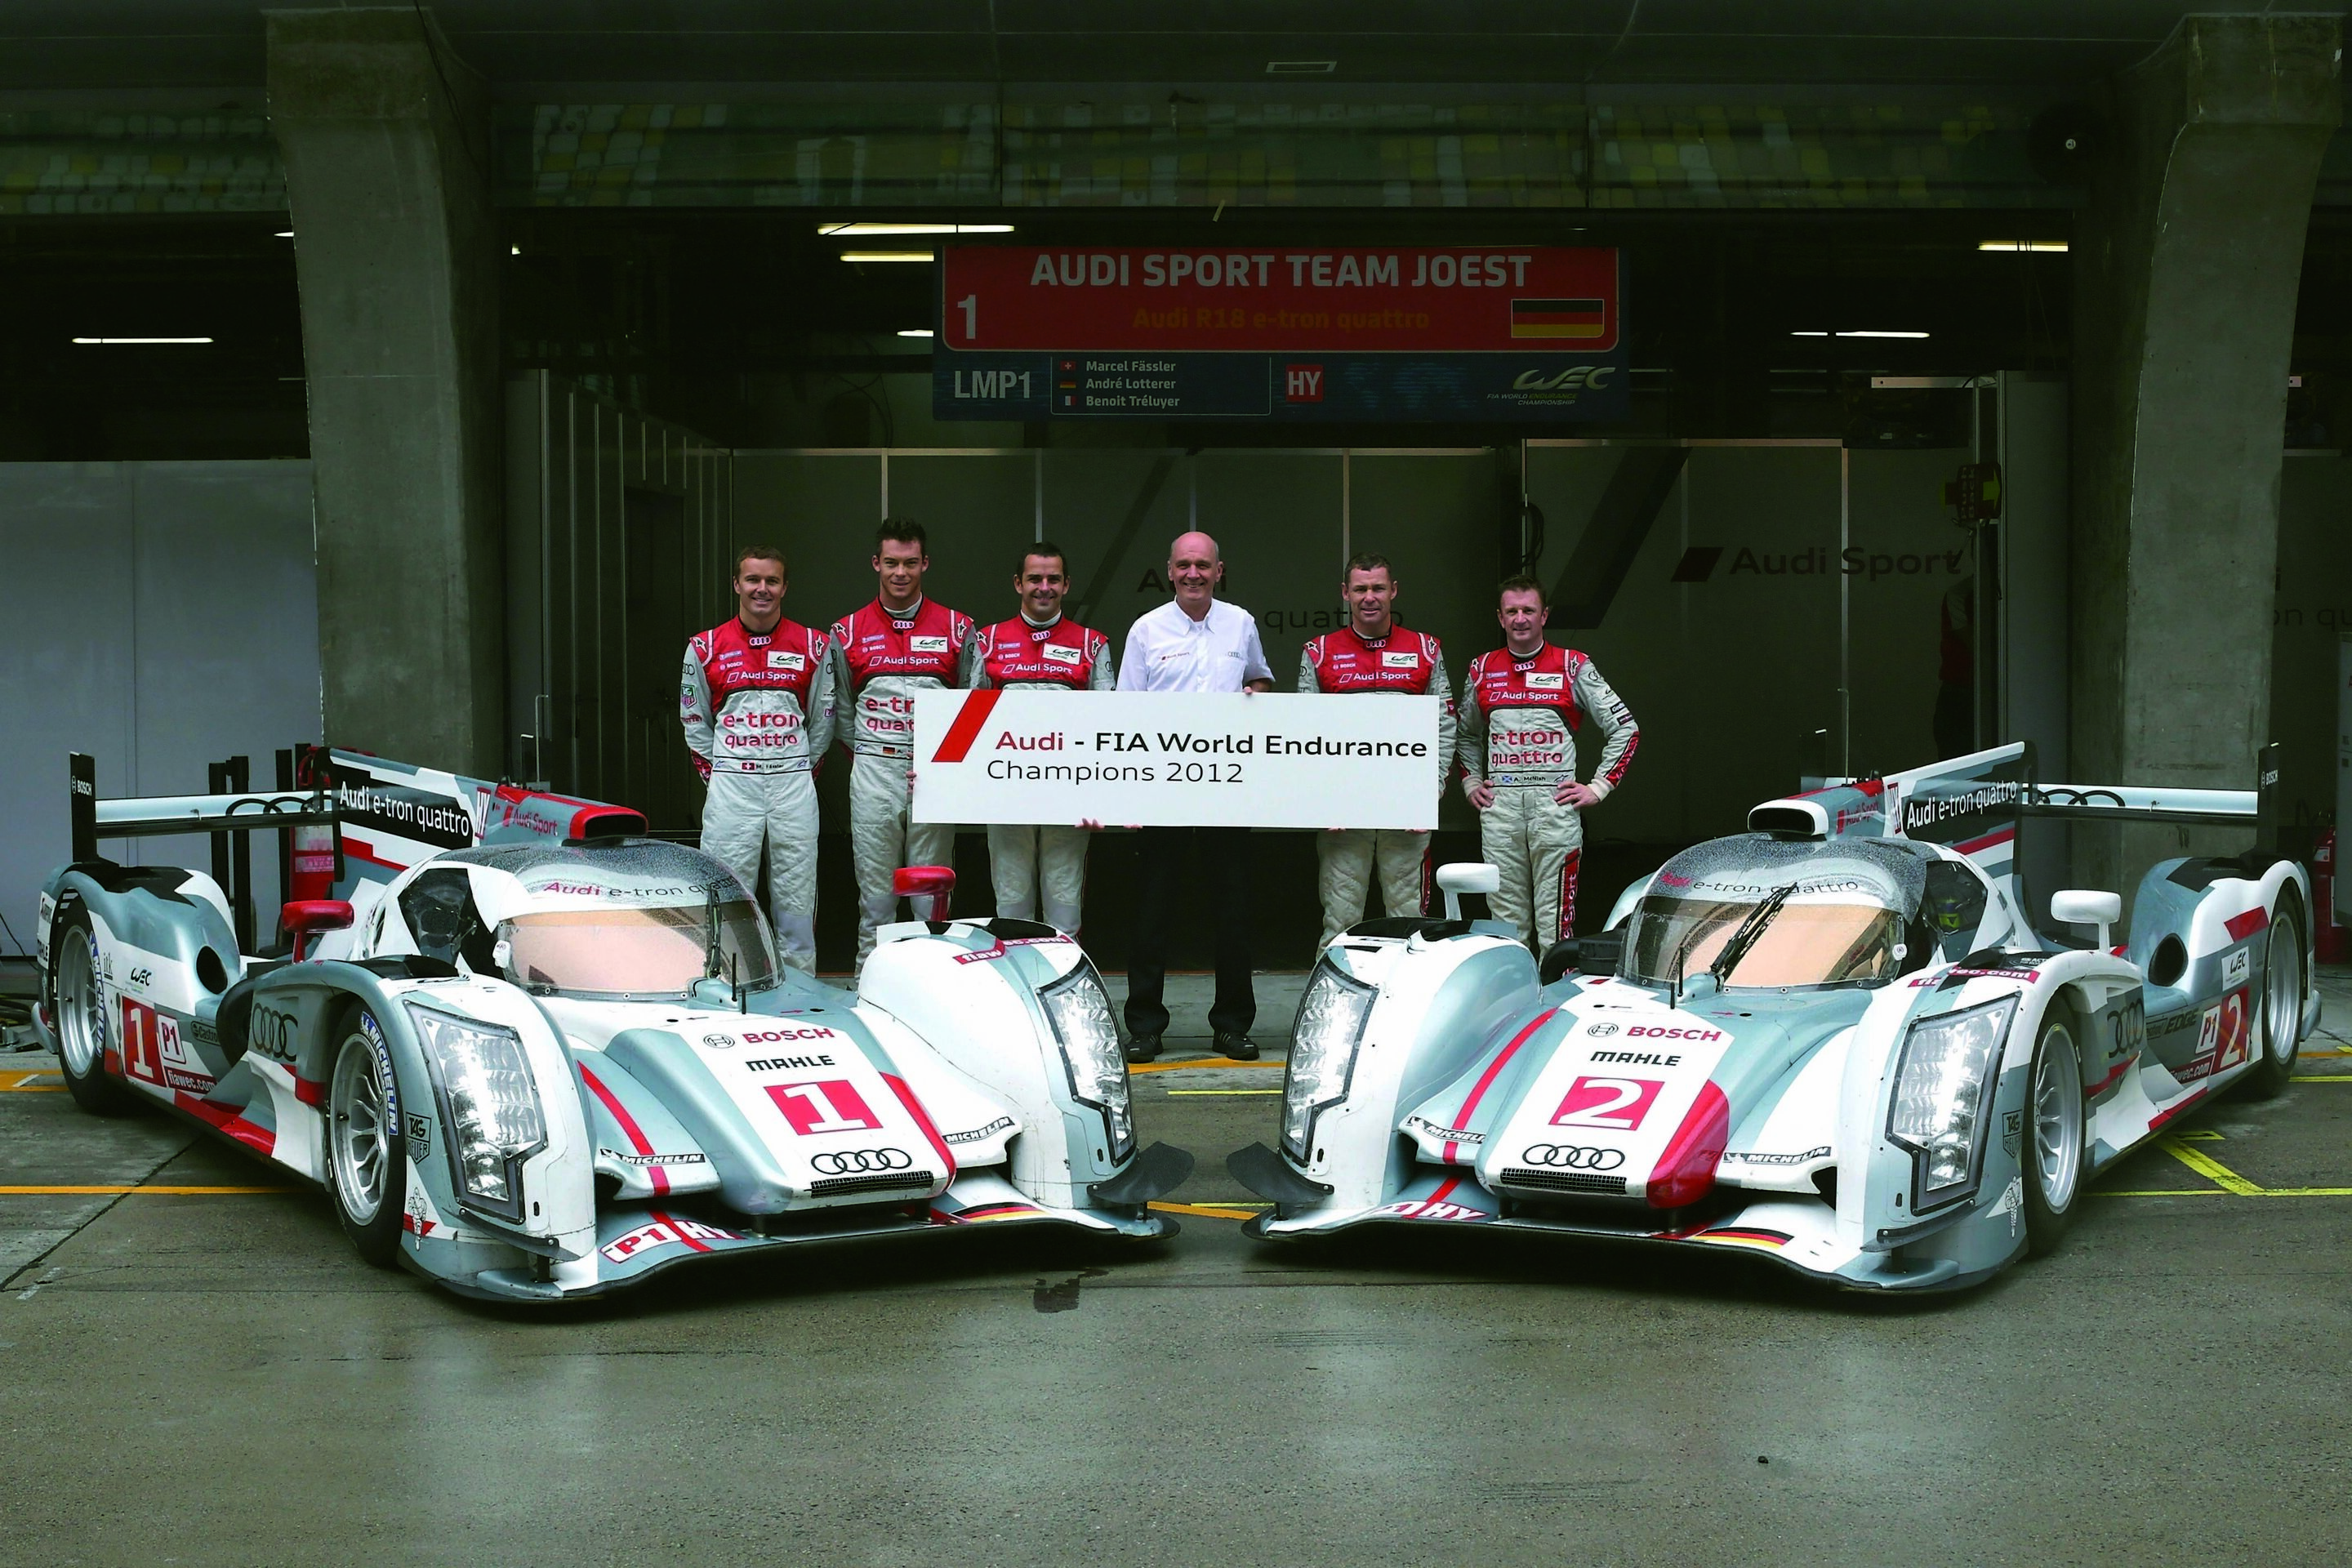 Interesting facts about the Audi World Champions trio